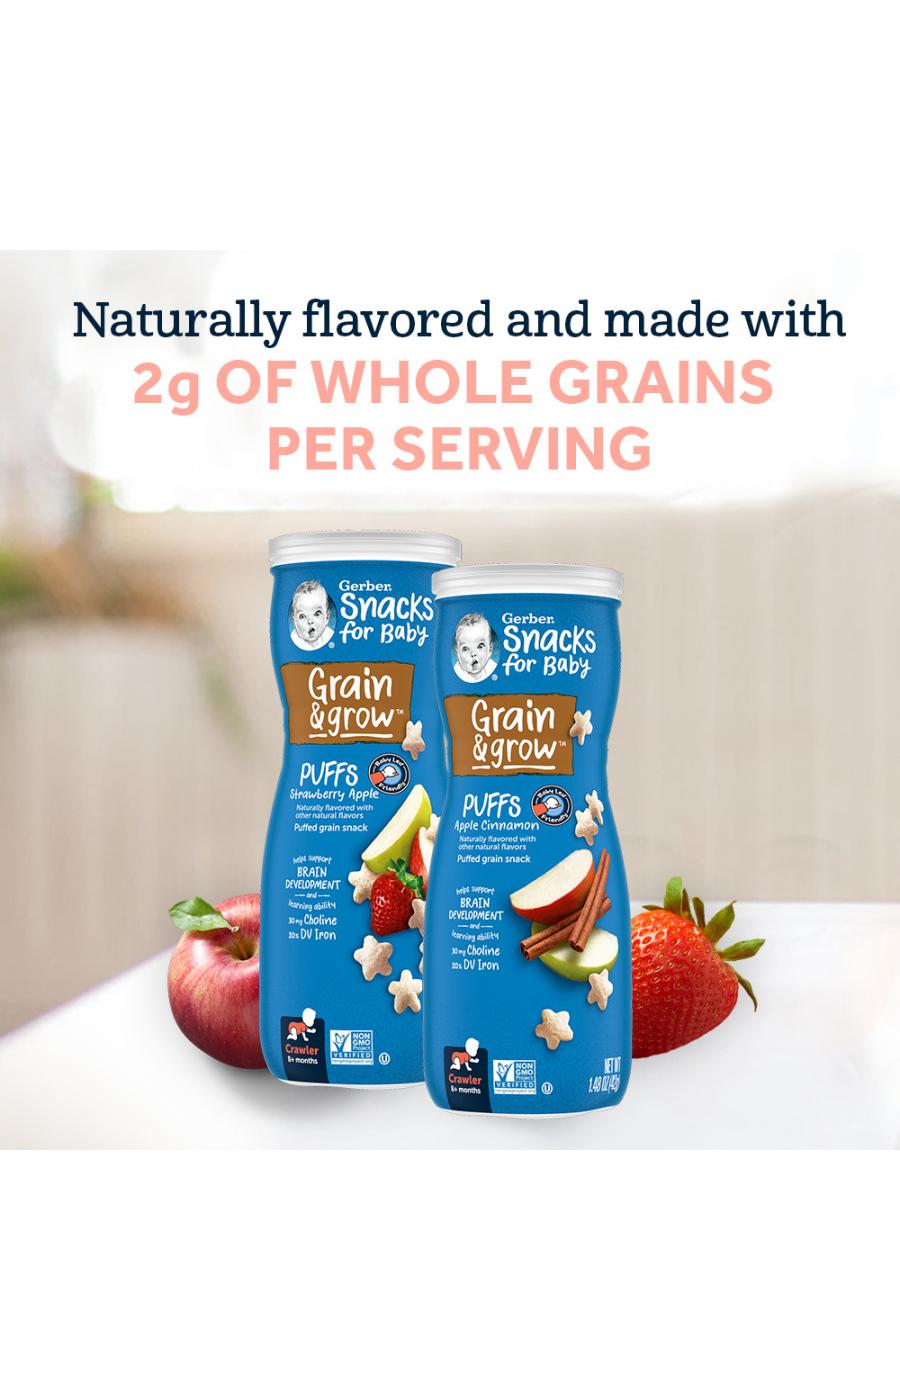 Gerber Snacks for Baby Grain & Grow Puffs Variety Pack - Banana & Strawberry Apple; image 8 of 8